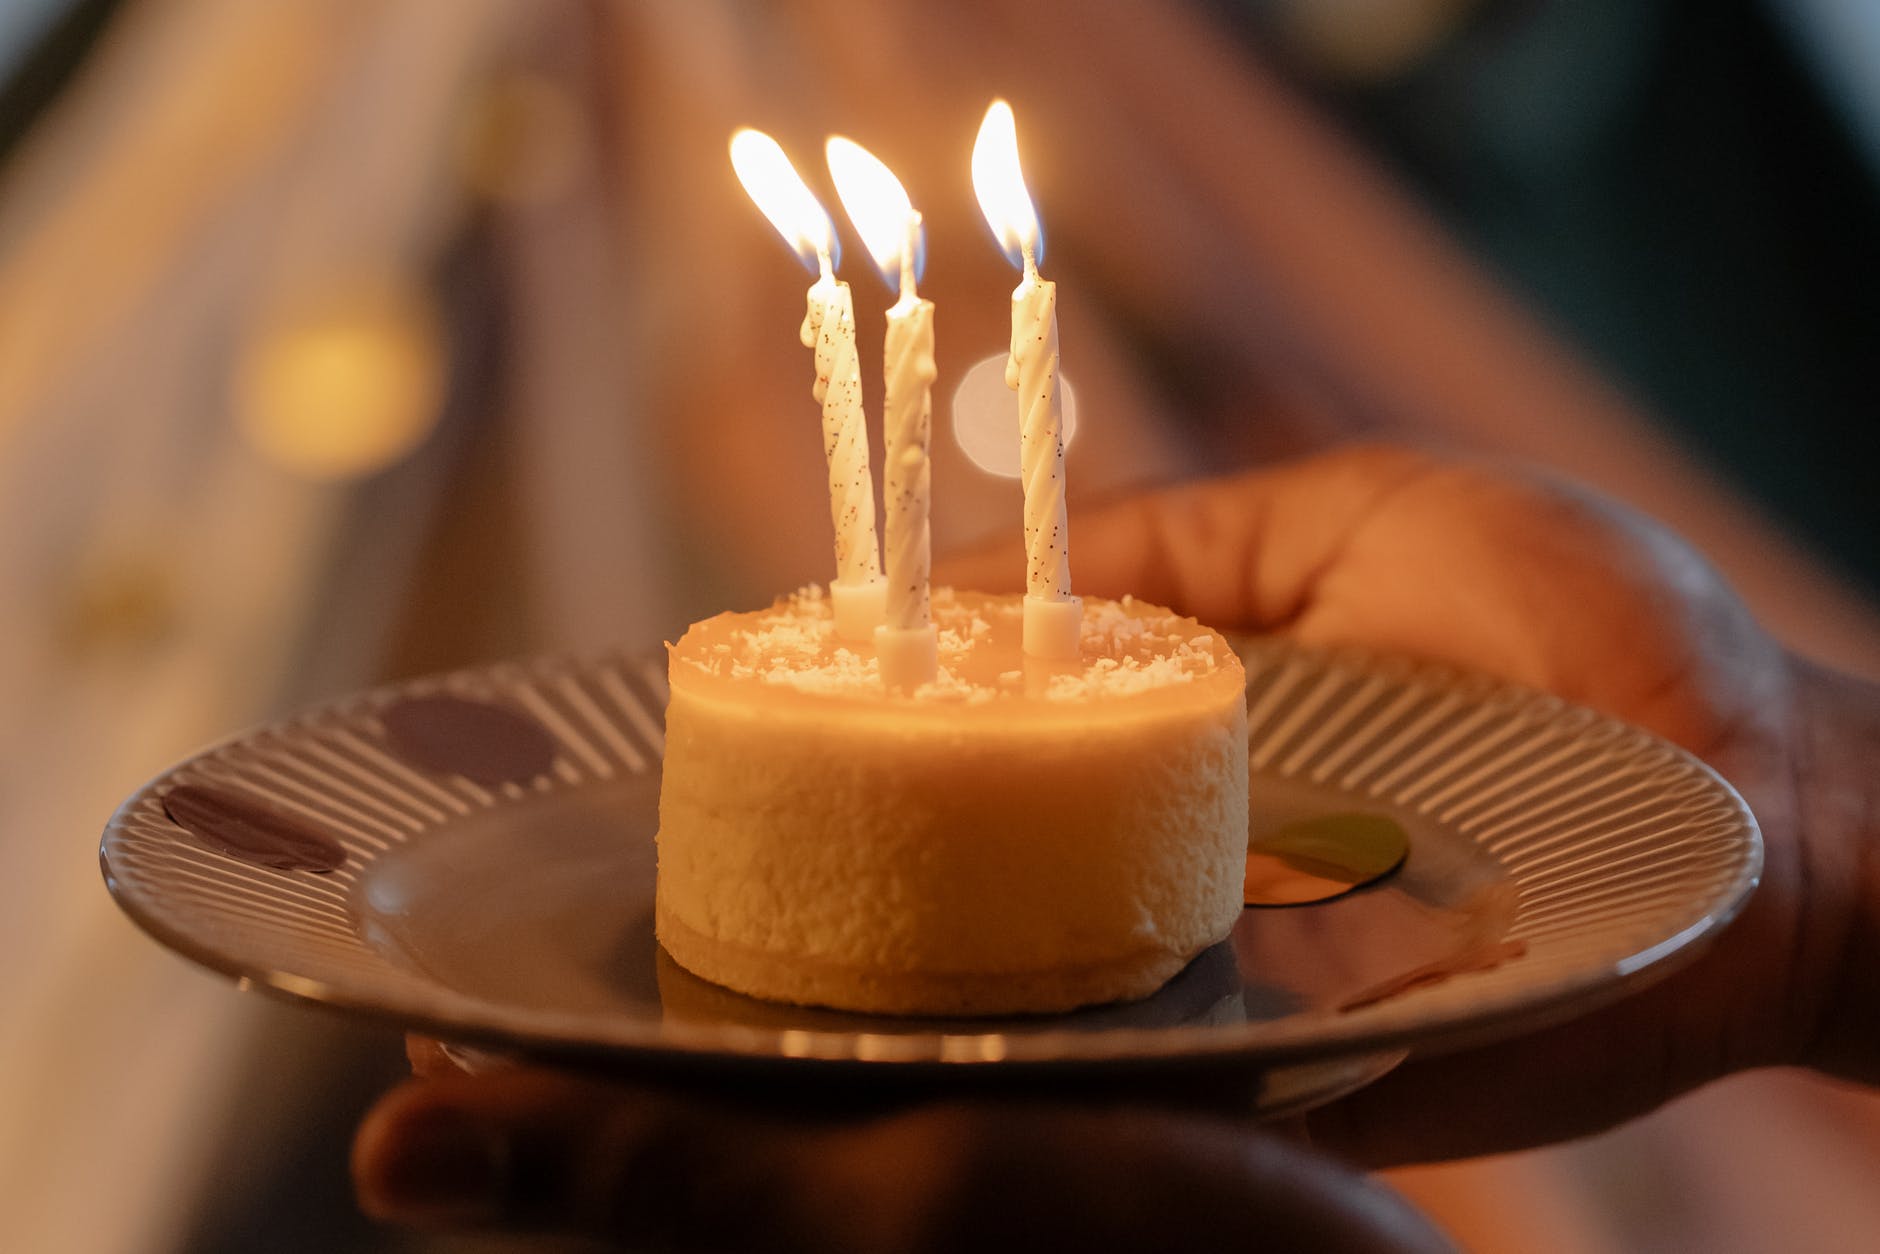 close up photograph of a birthday cake with lit candles